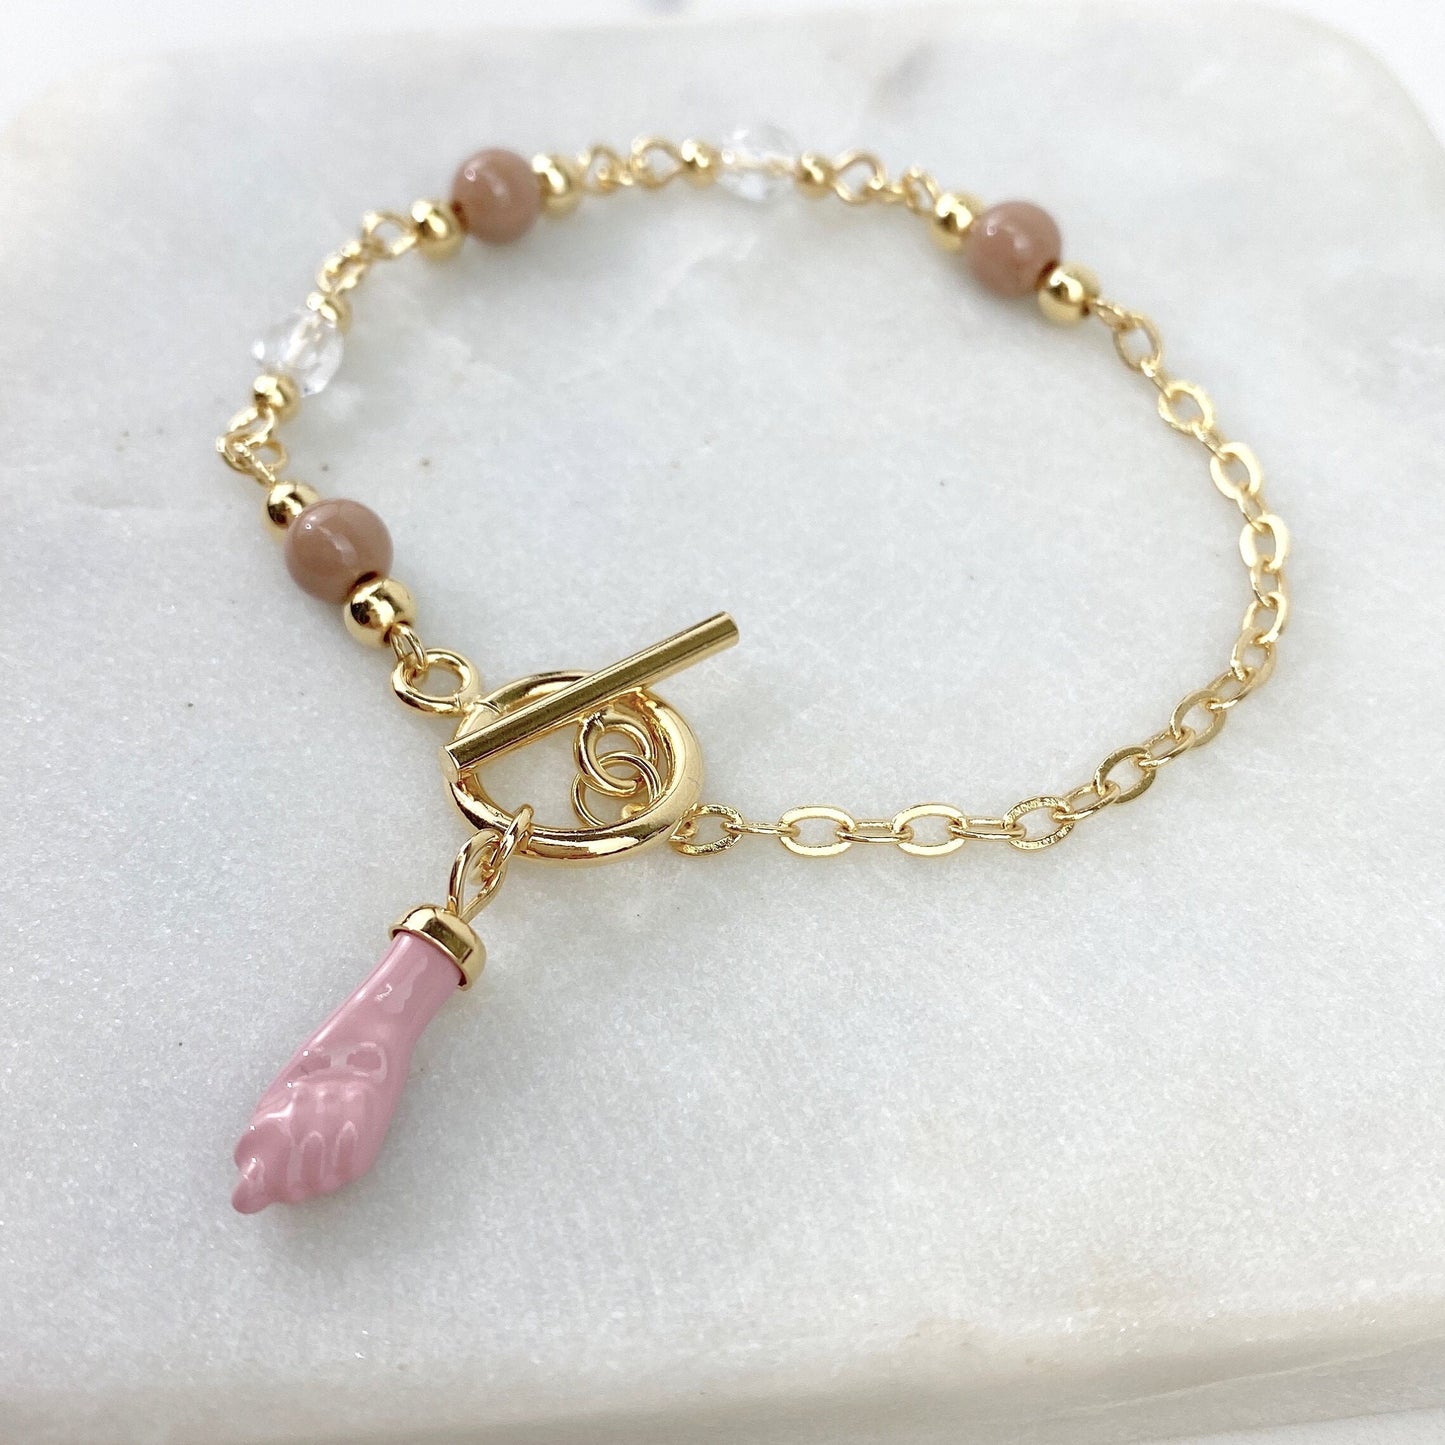 18k Gold Filled Beige Beads and Pink Hand Charm Bracelets Featuring Toggle Clasp And Link Chain Wholesale Jewelry Supplies